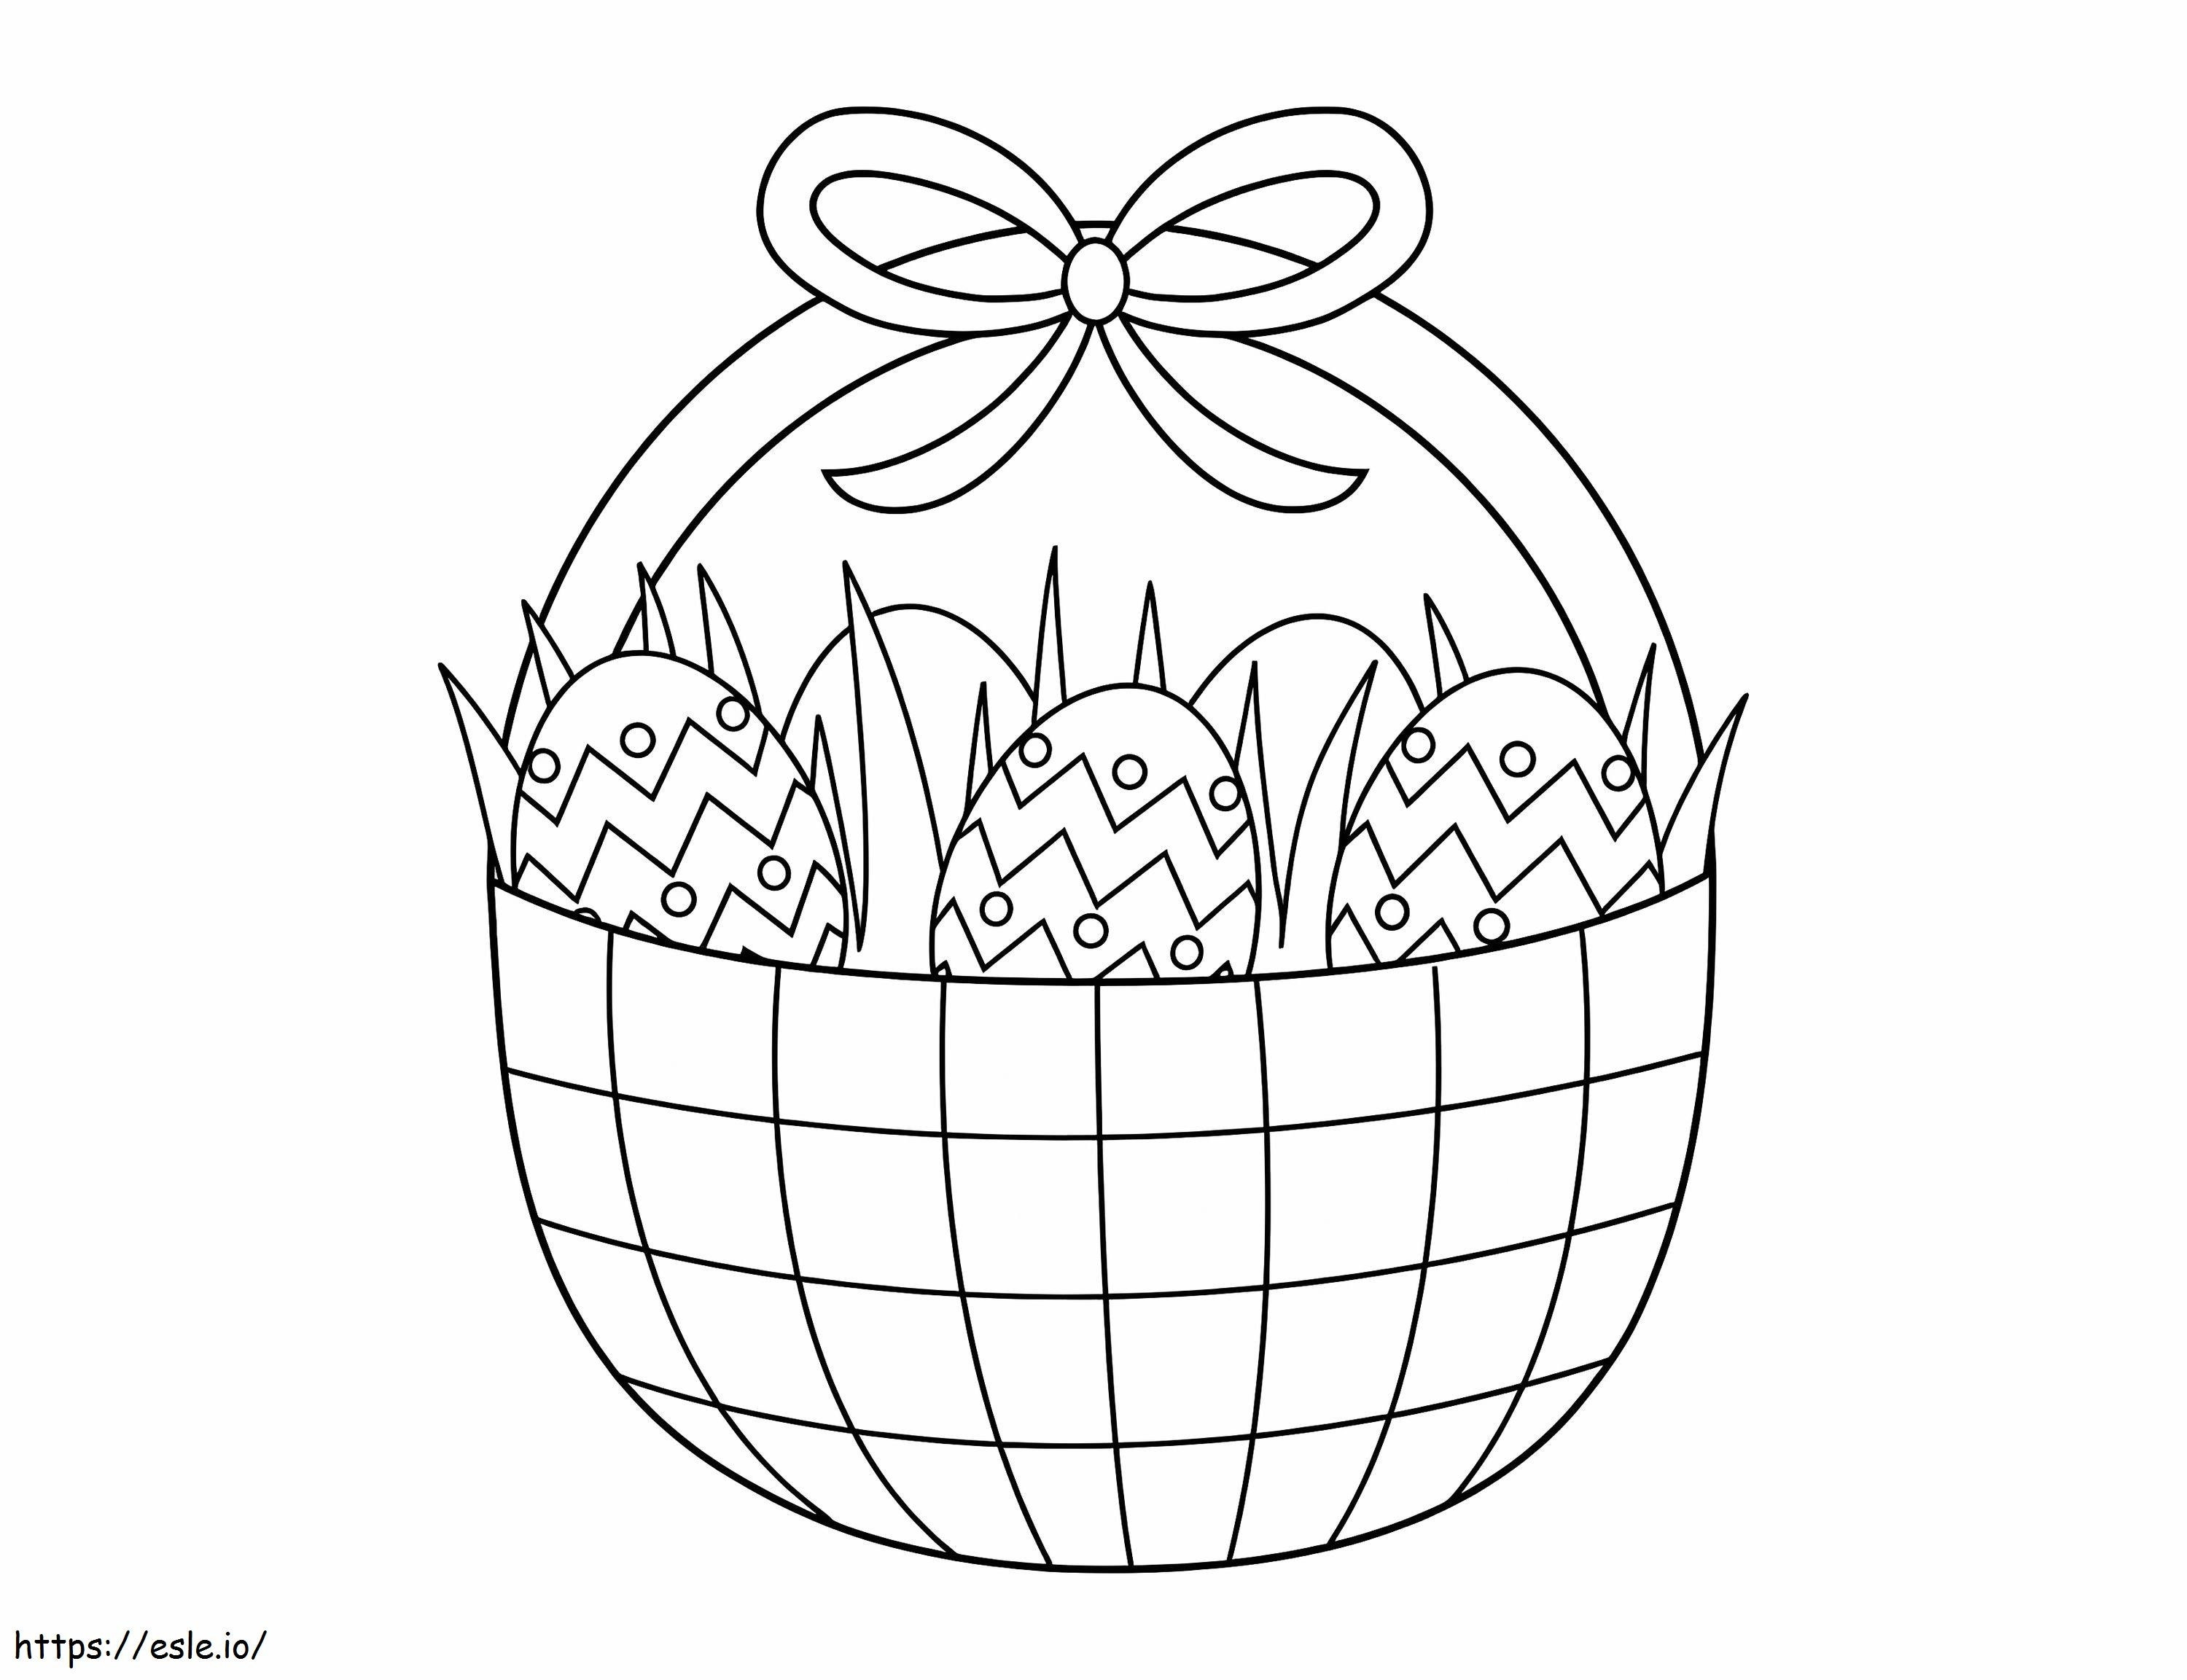 Basic Basket Easter Eggs coloring page